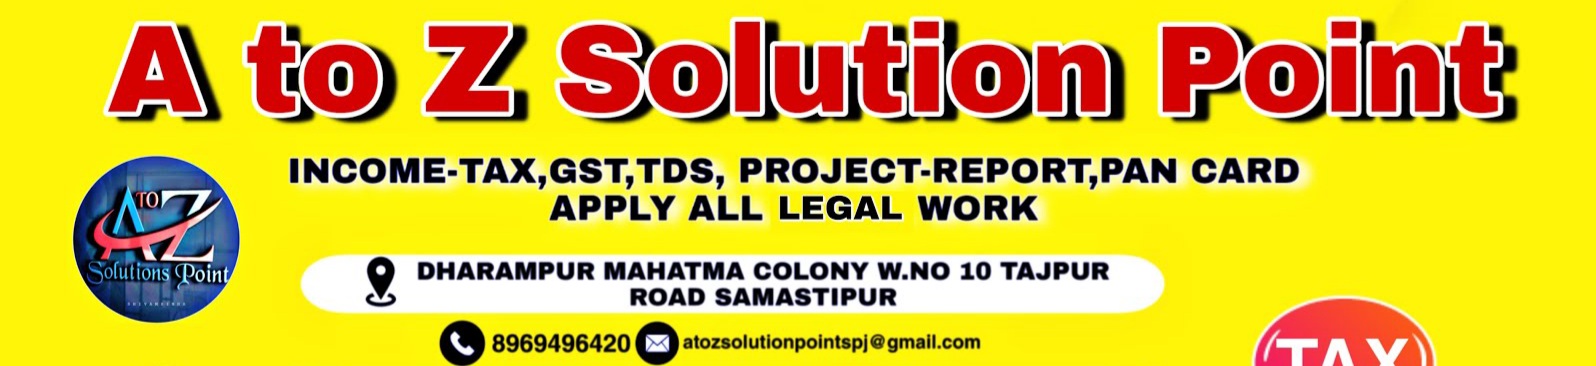 A to Z Solution Point.|Architect|Professional Services